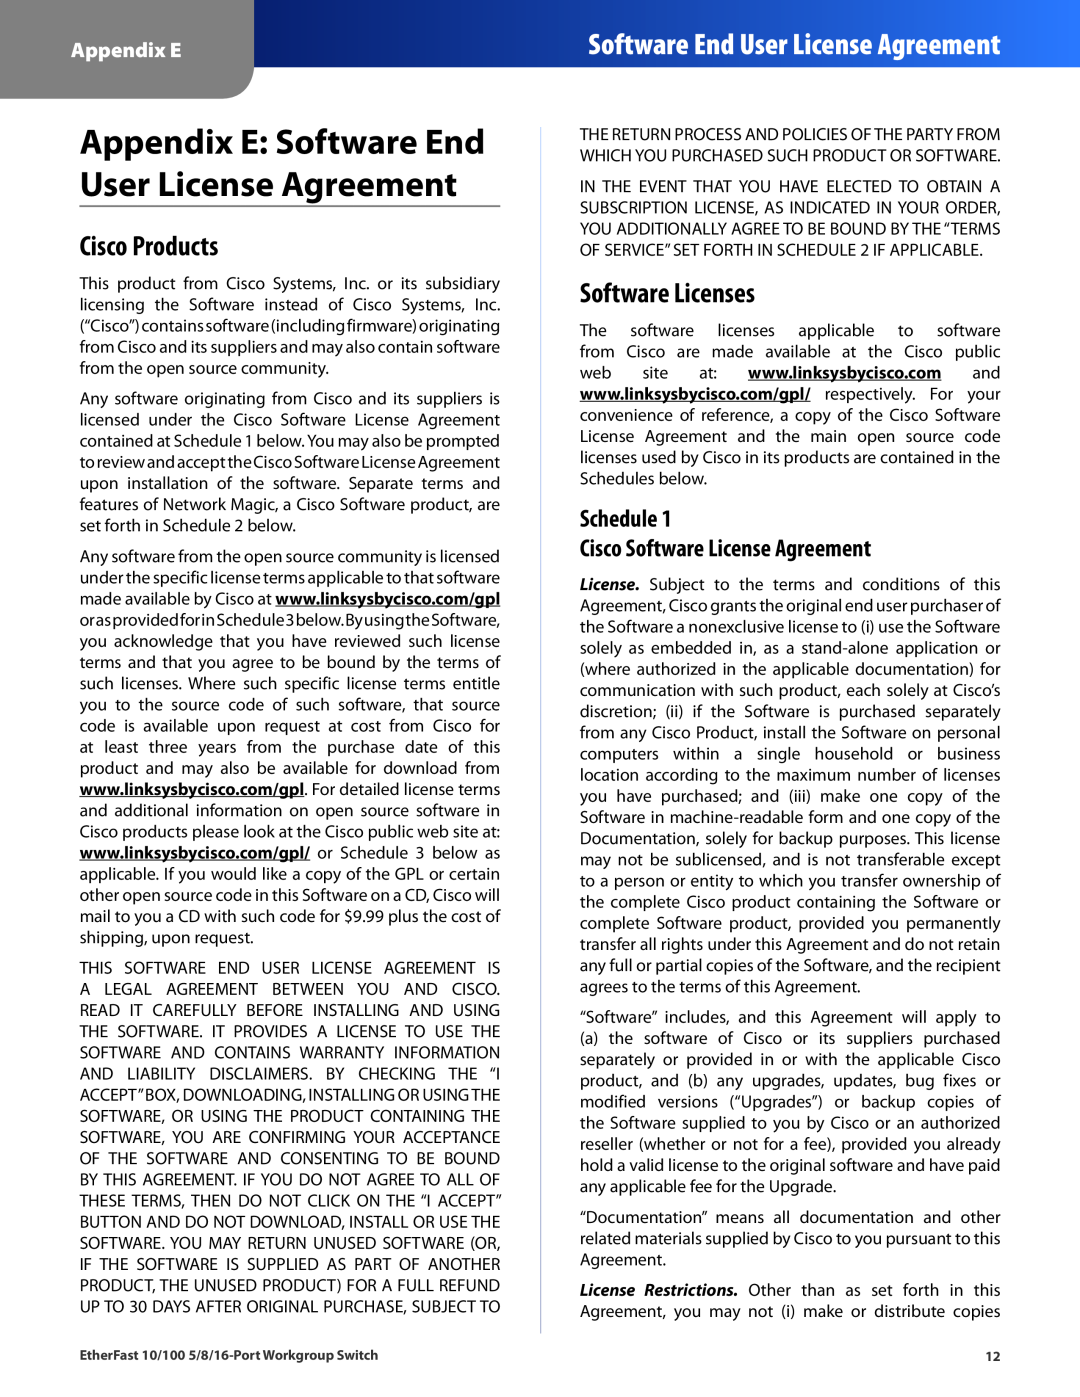 Linksys EZXS16W manual Appendix E Software End User License Agreement, Cisco Products, Software Licenses 